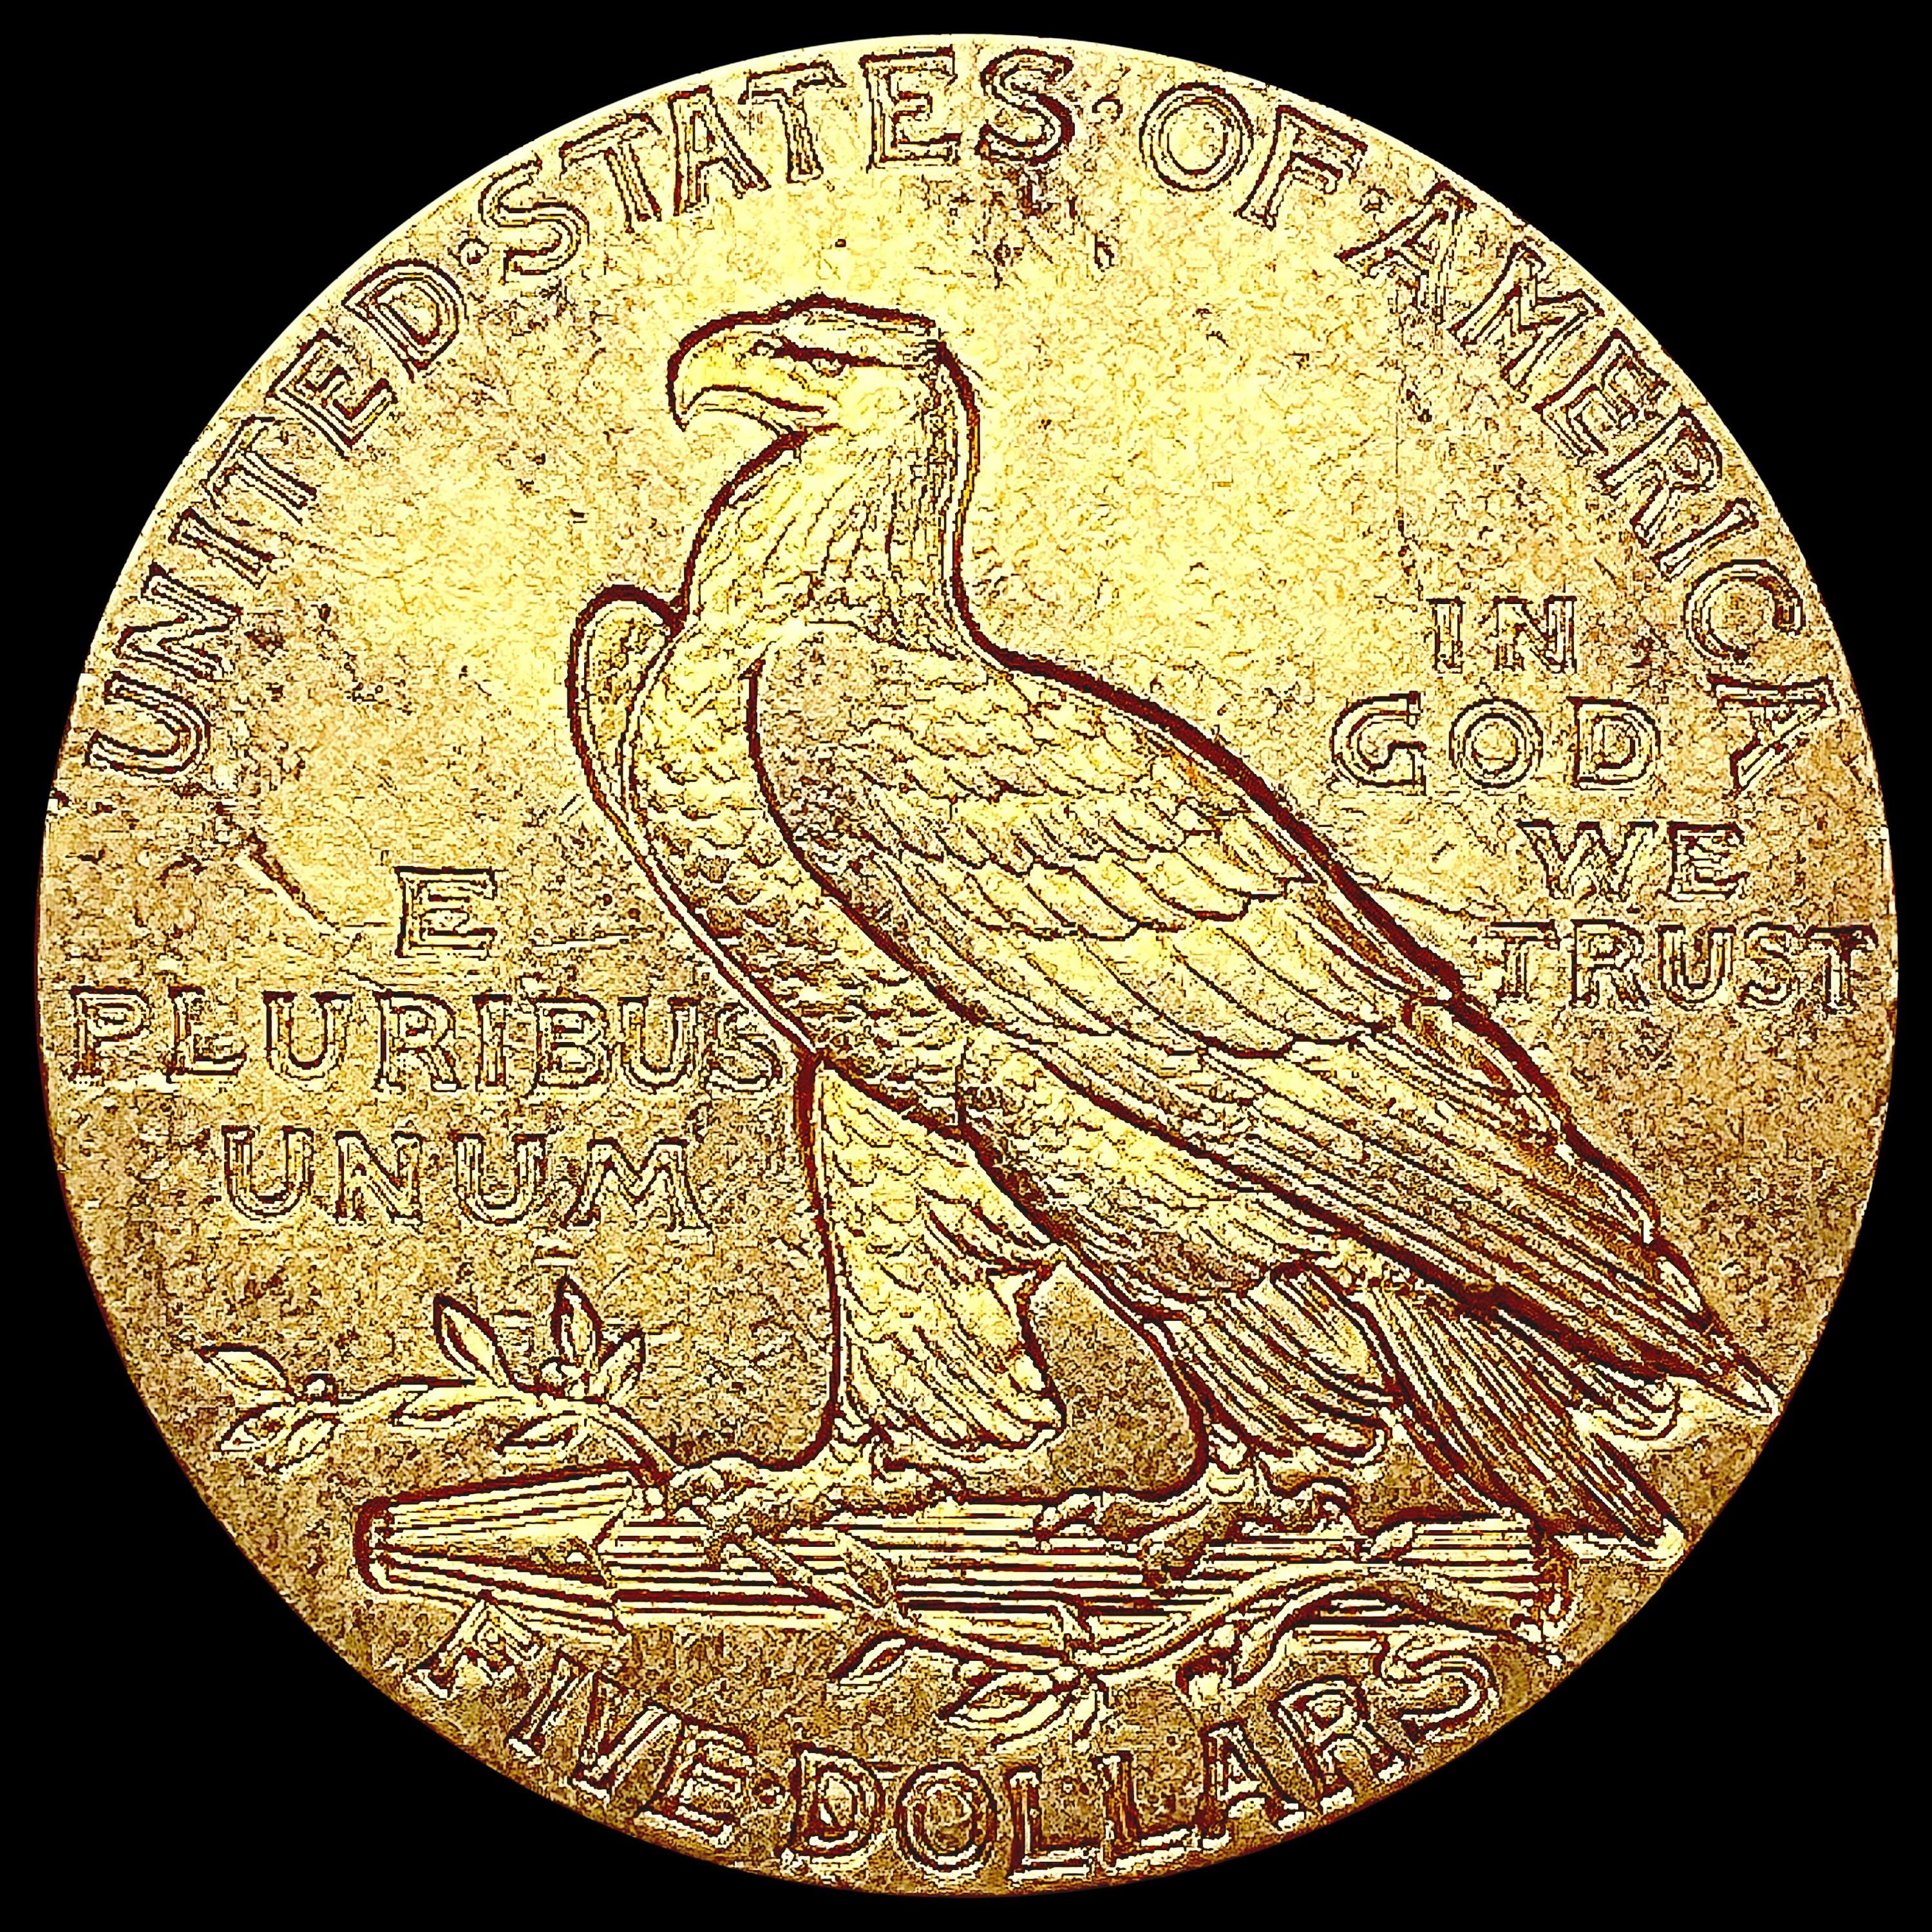 1908 $5 Gold Half Eagle ABOUT UNCIRCULATED